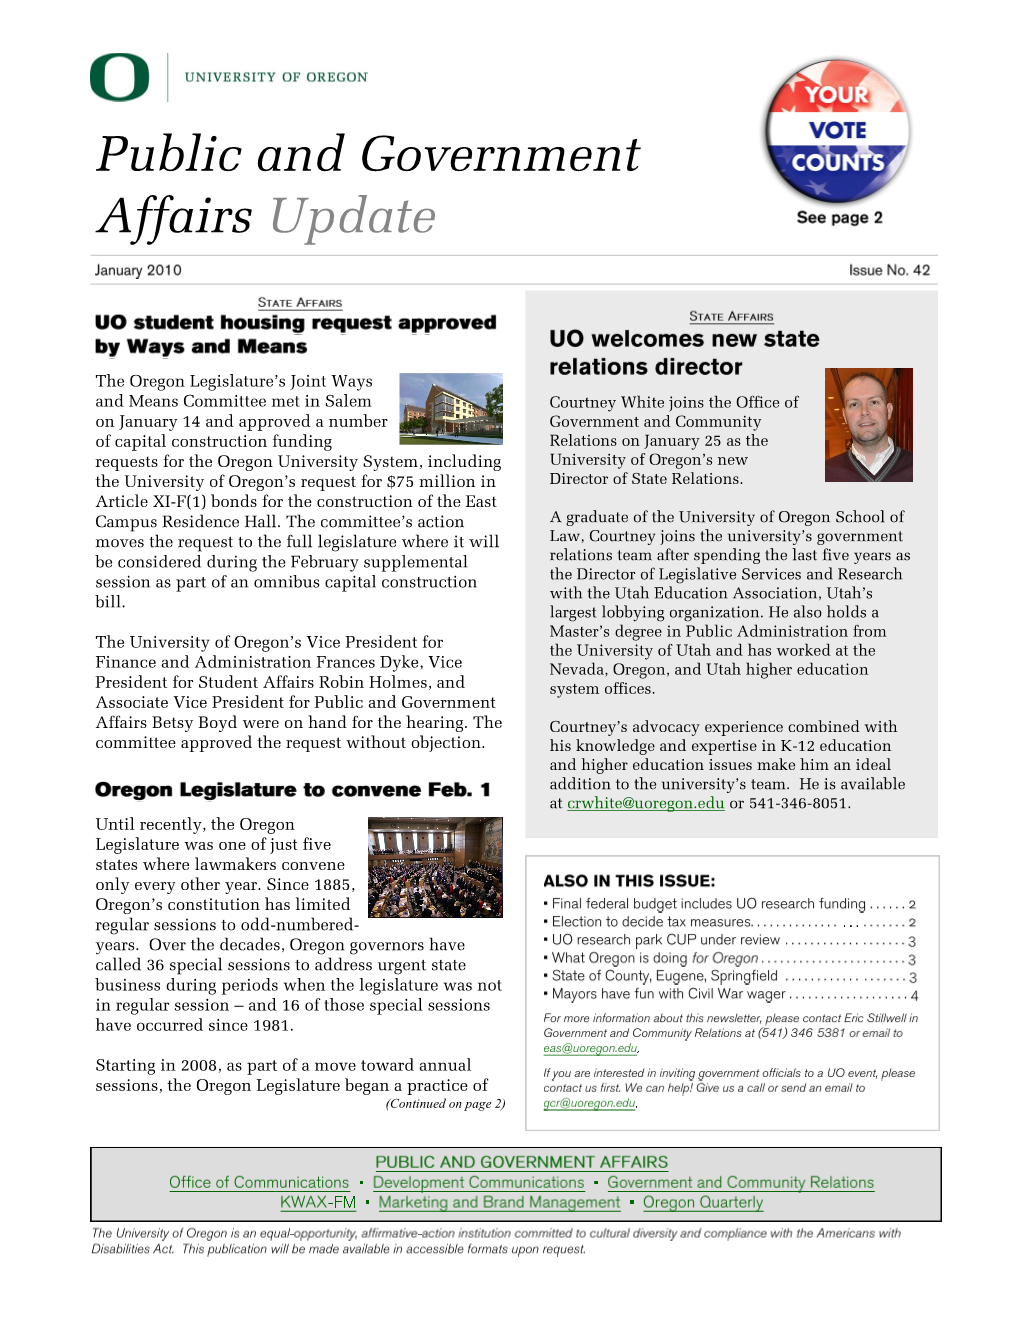 Public and Government Affairs Update